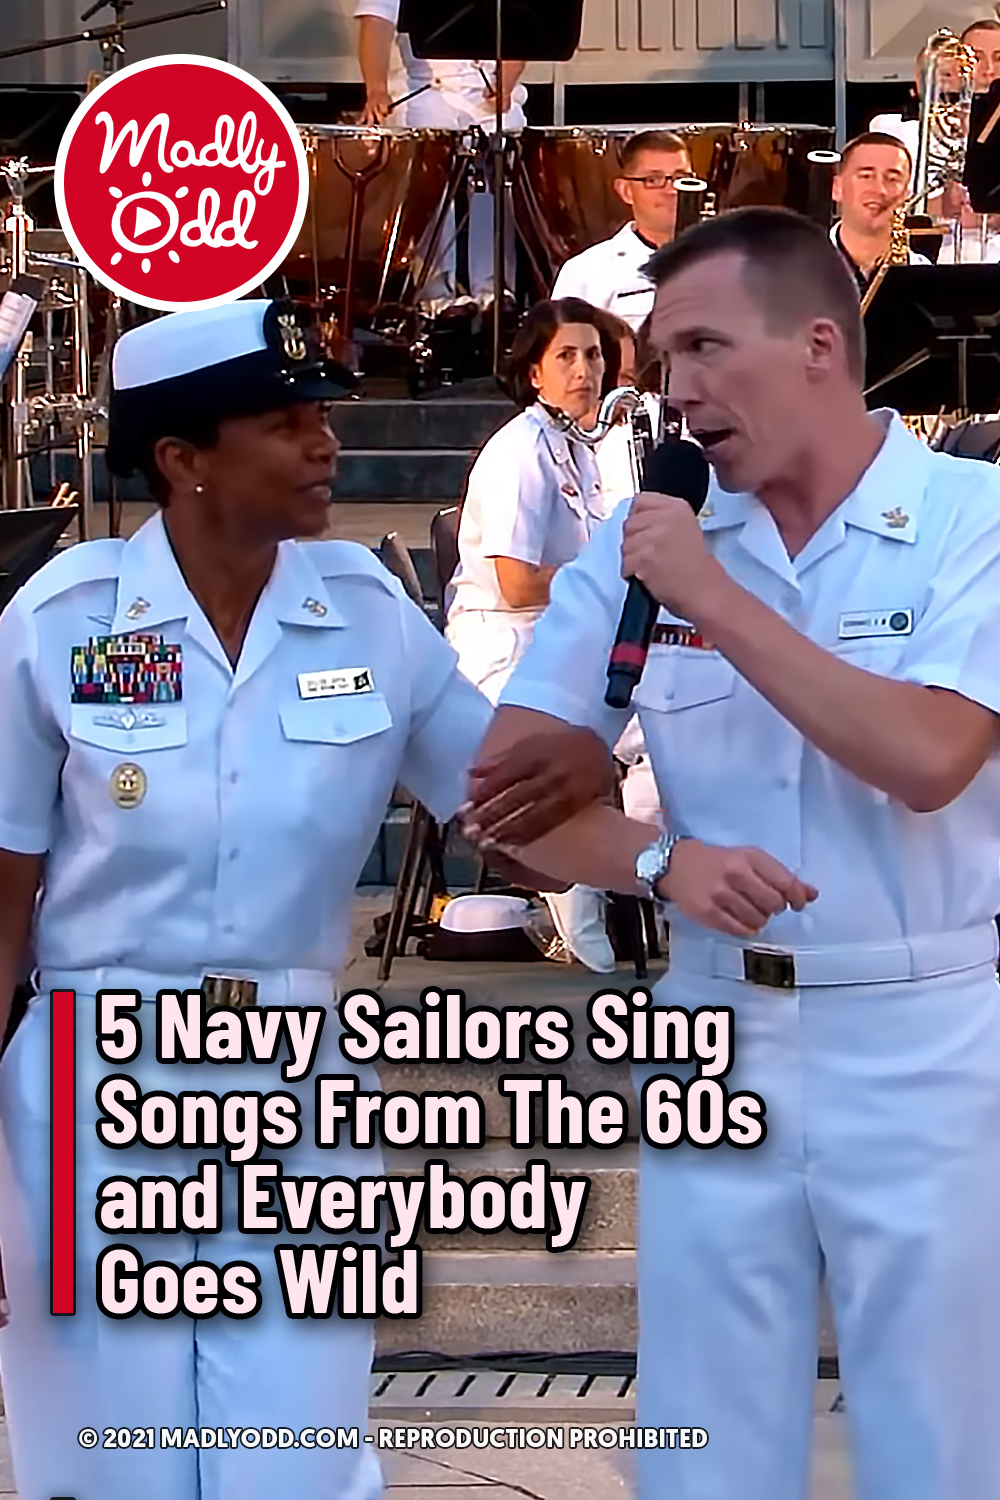 5 Navy Sailors Sing Songs From The 60s and Everybody Goes Wild